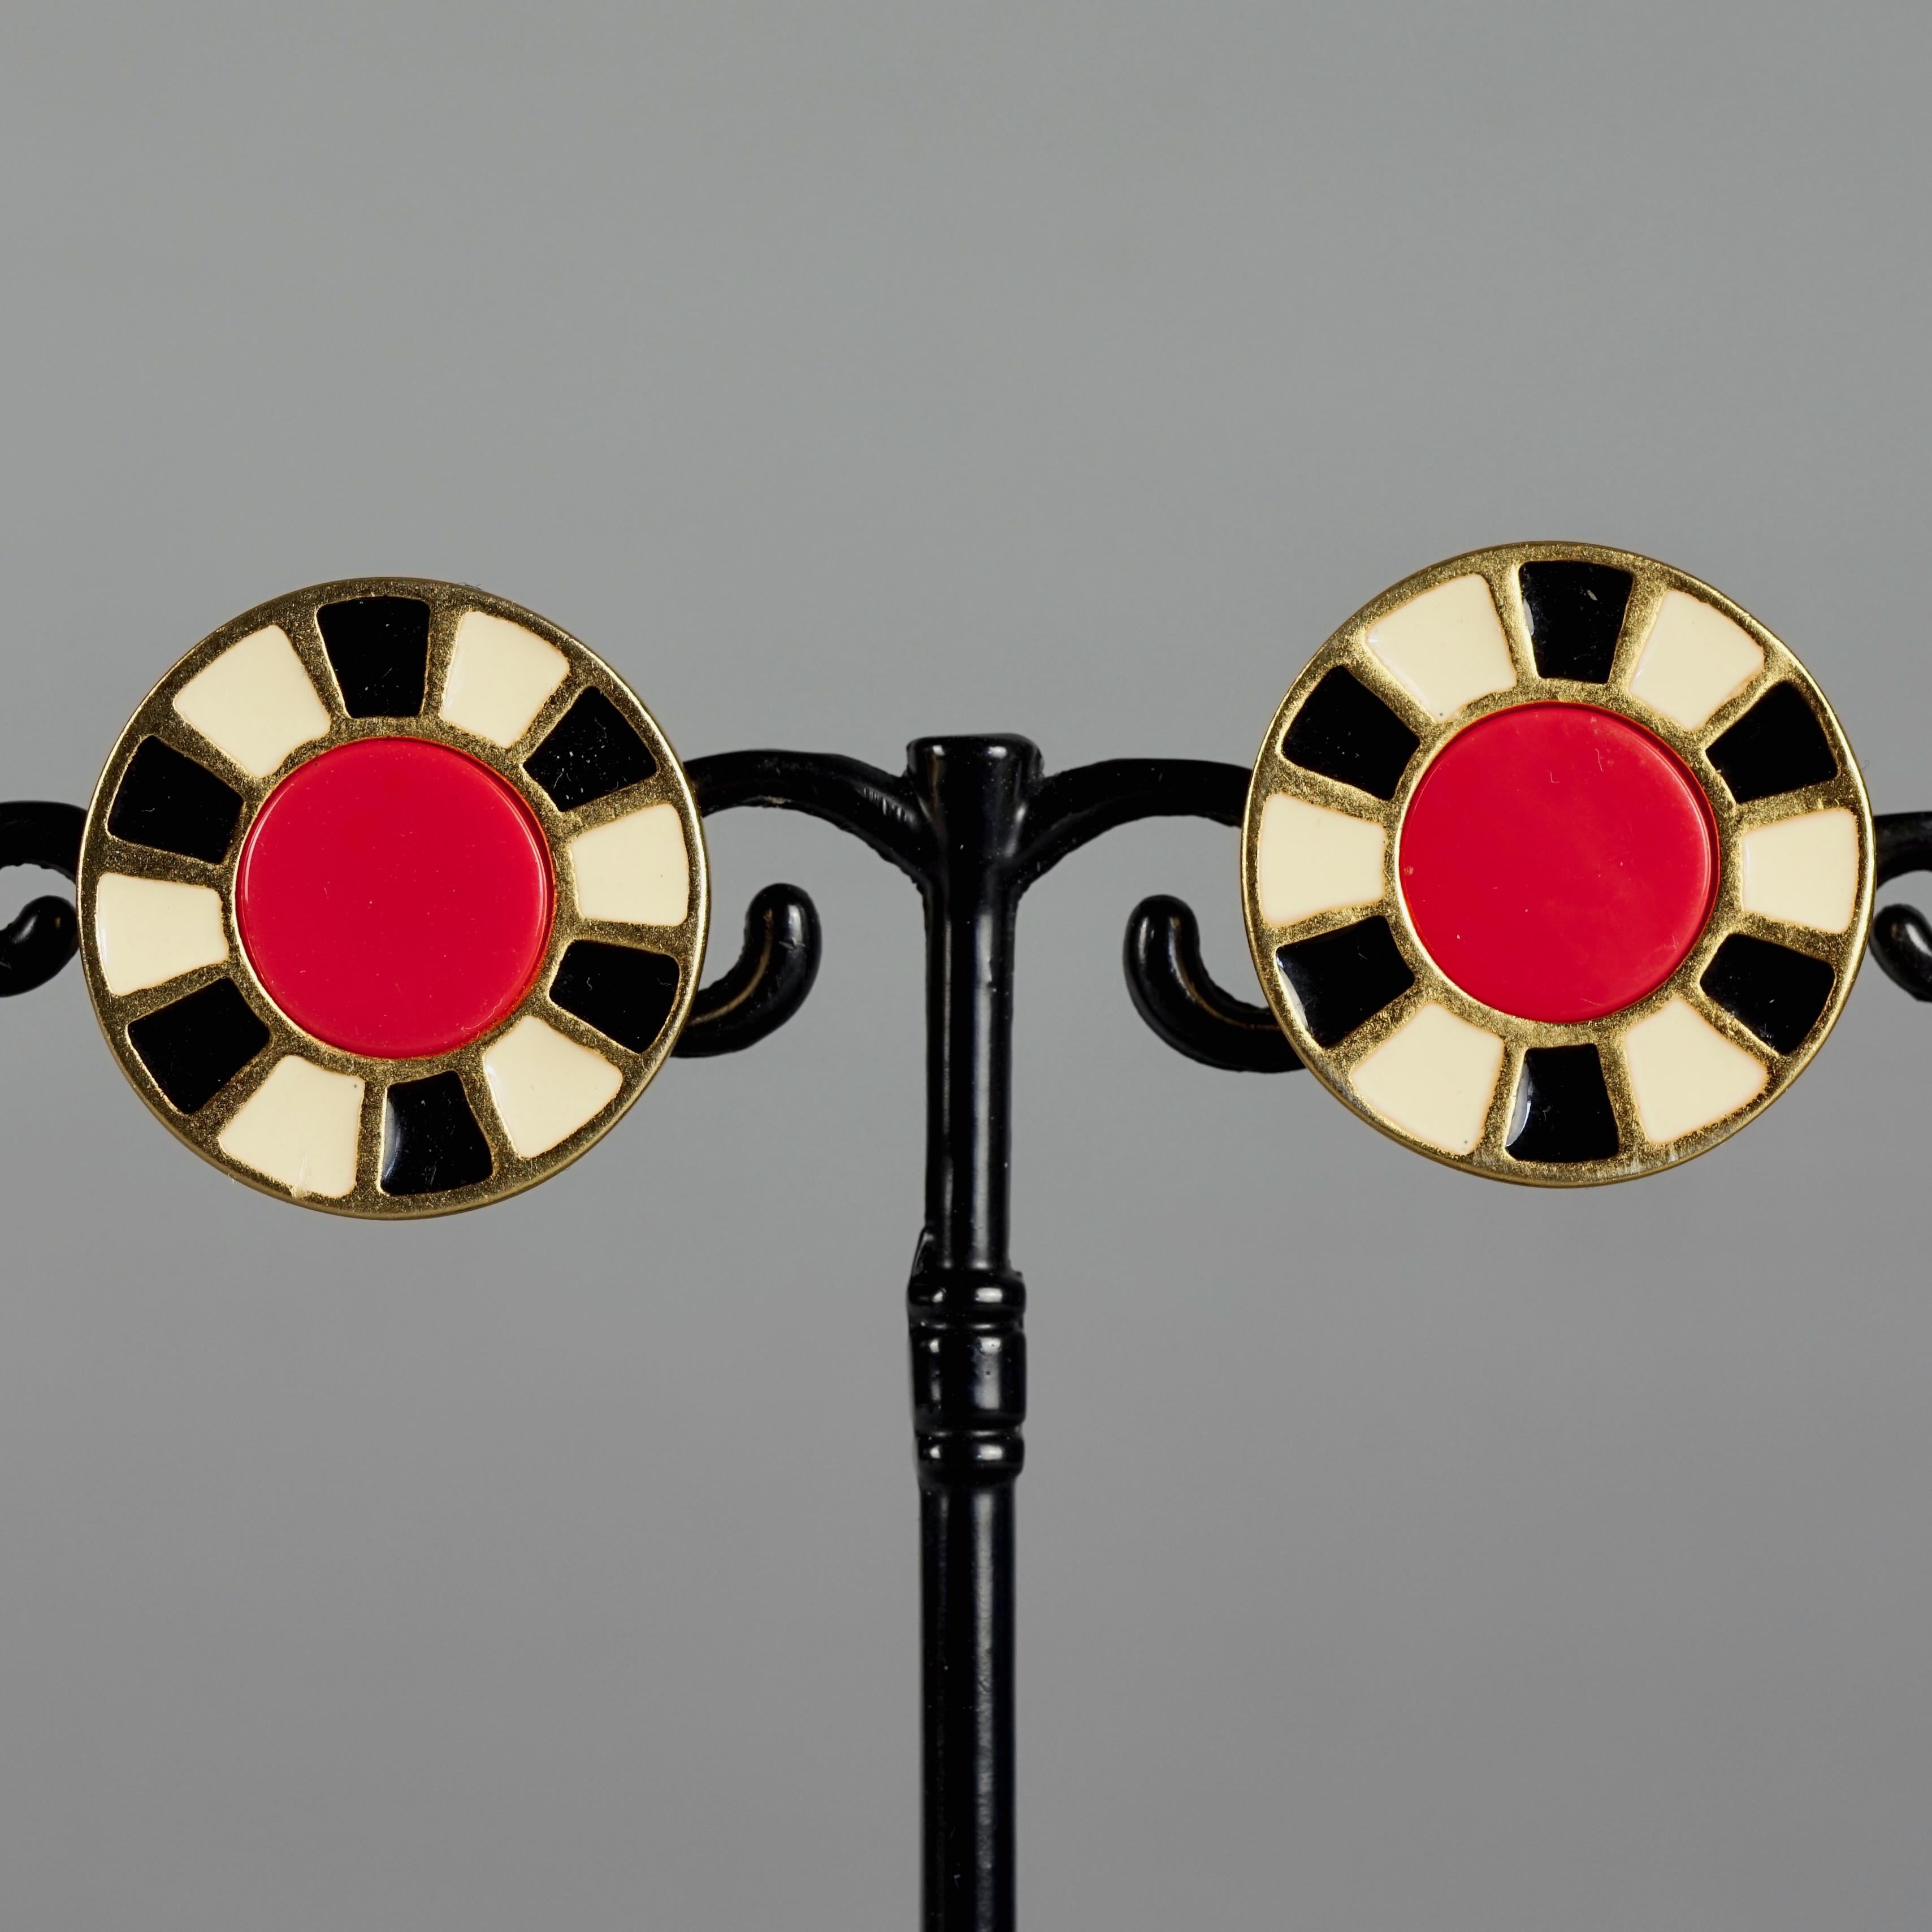 Vintage KARL LAGERFELD Casino Chip Enamel Novelty Earrings In Excellent Condition For Sale In Kingersheim, Alsace